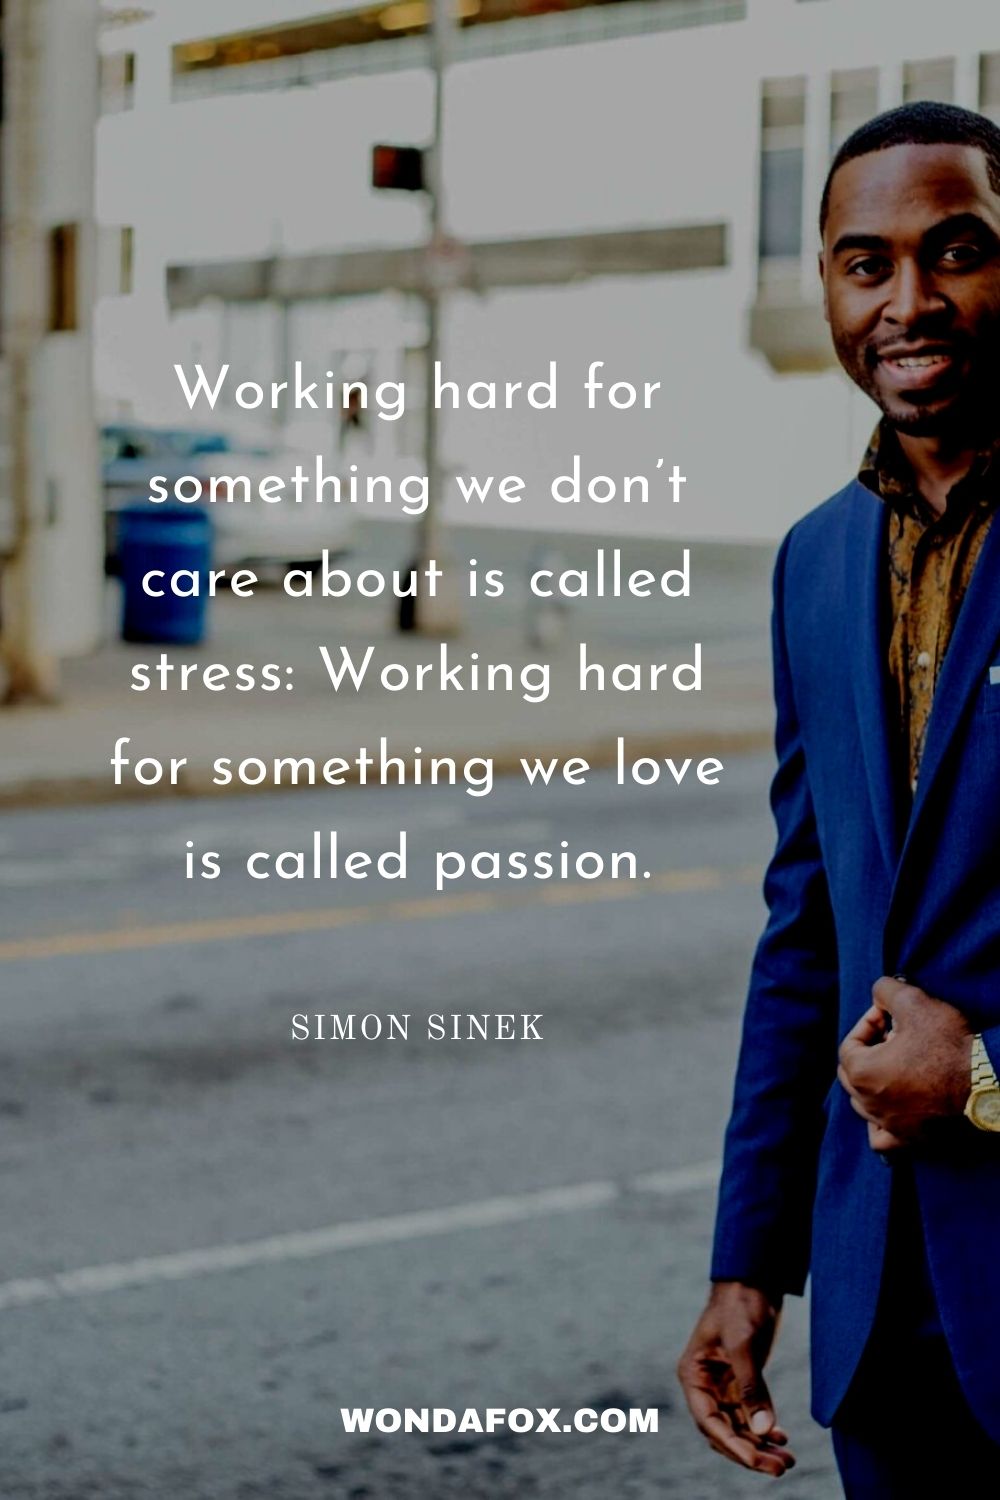 Working hard for something we don’t care about is called stress: Working hard for something we love is called passion.